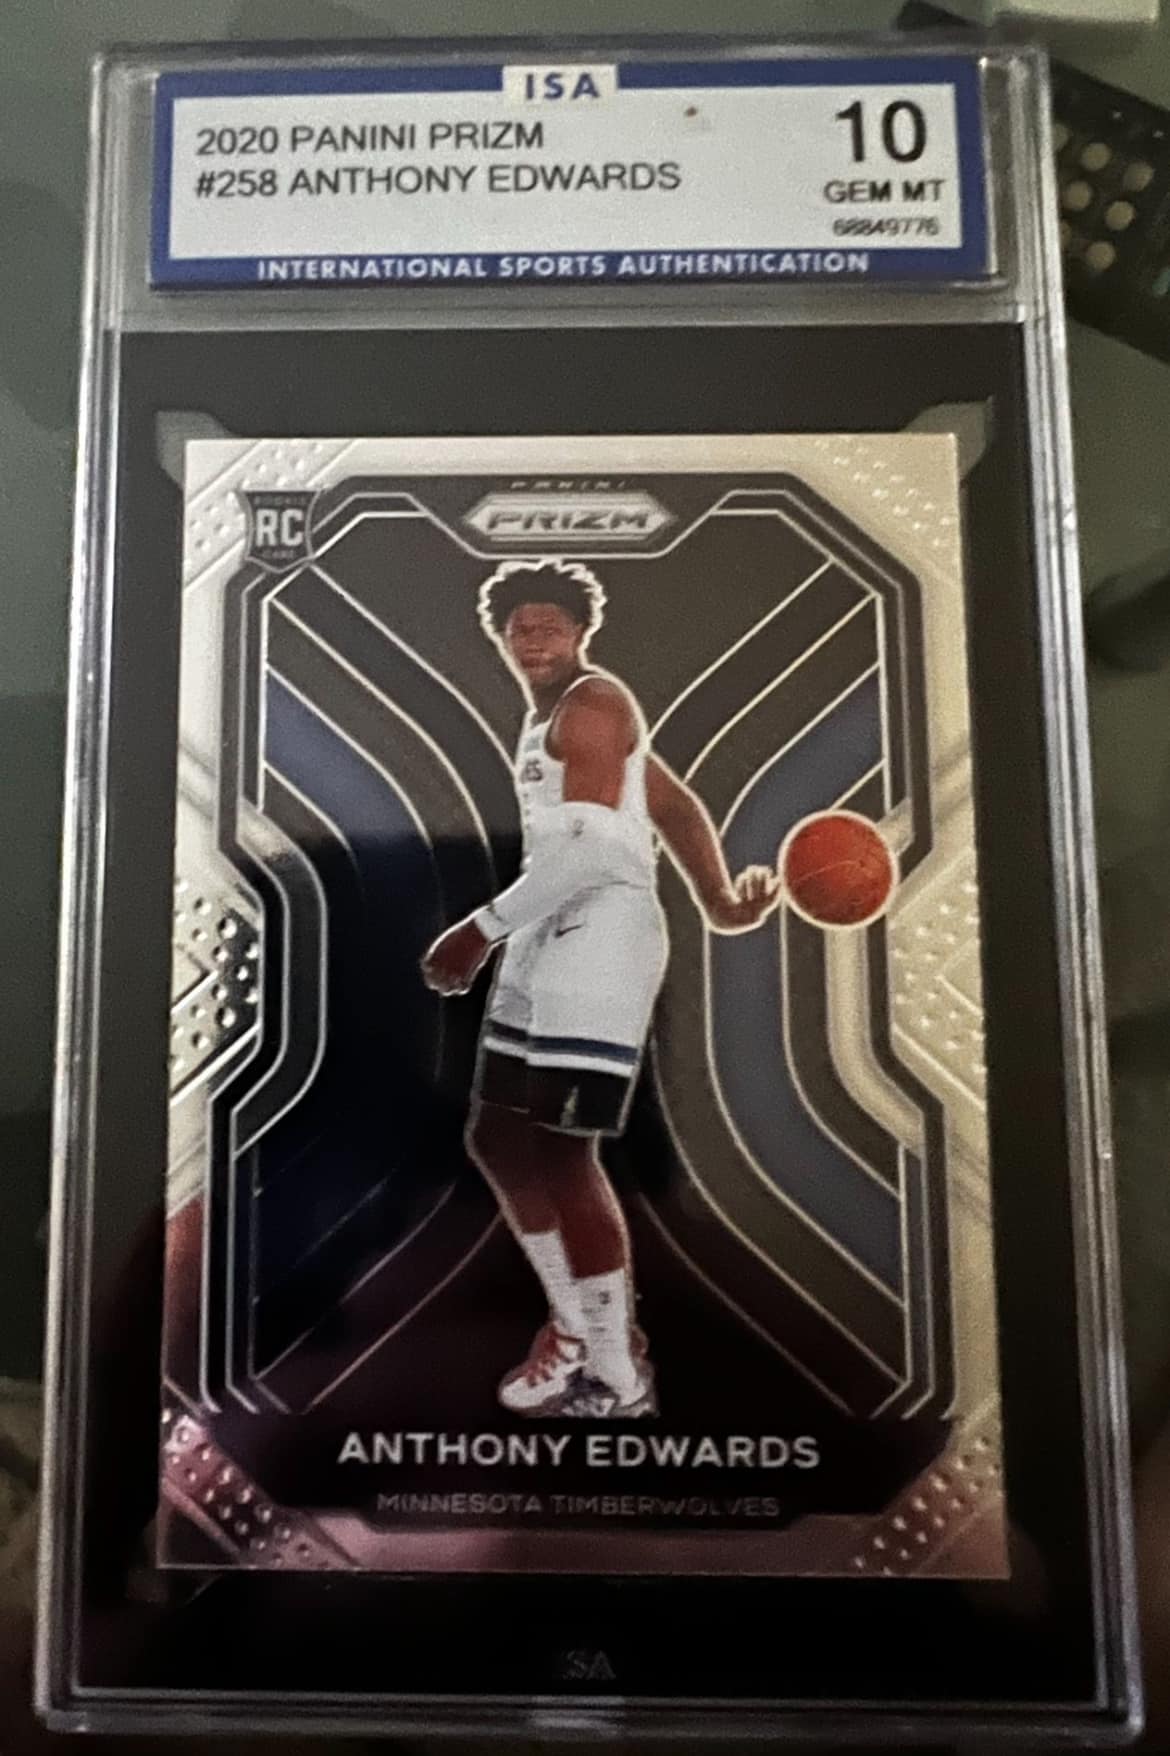 Surging Interest in Anthony Edwards' Trading Cards: Over $3 Million Sold on eBay